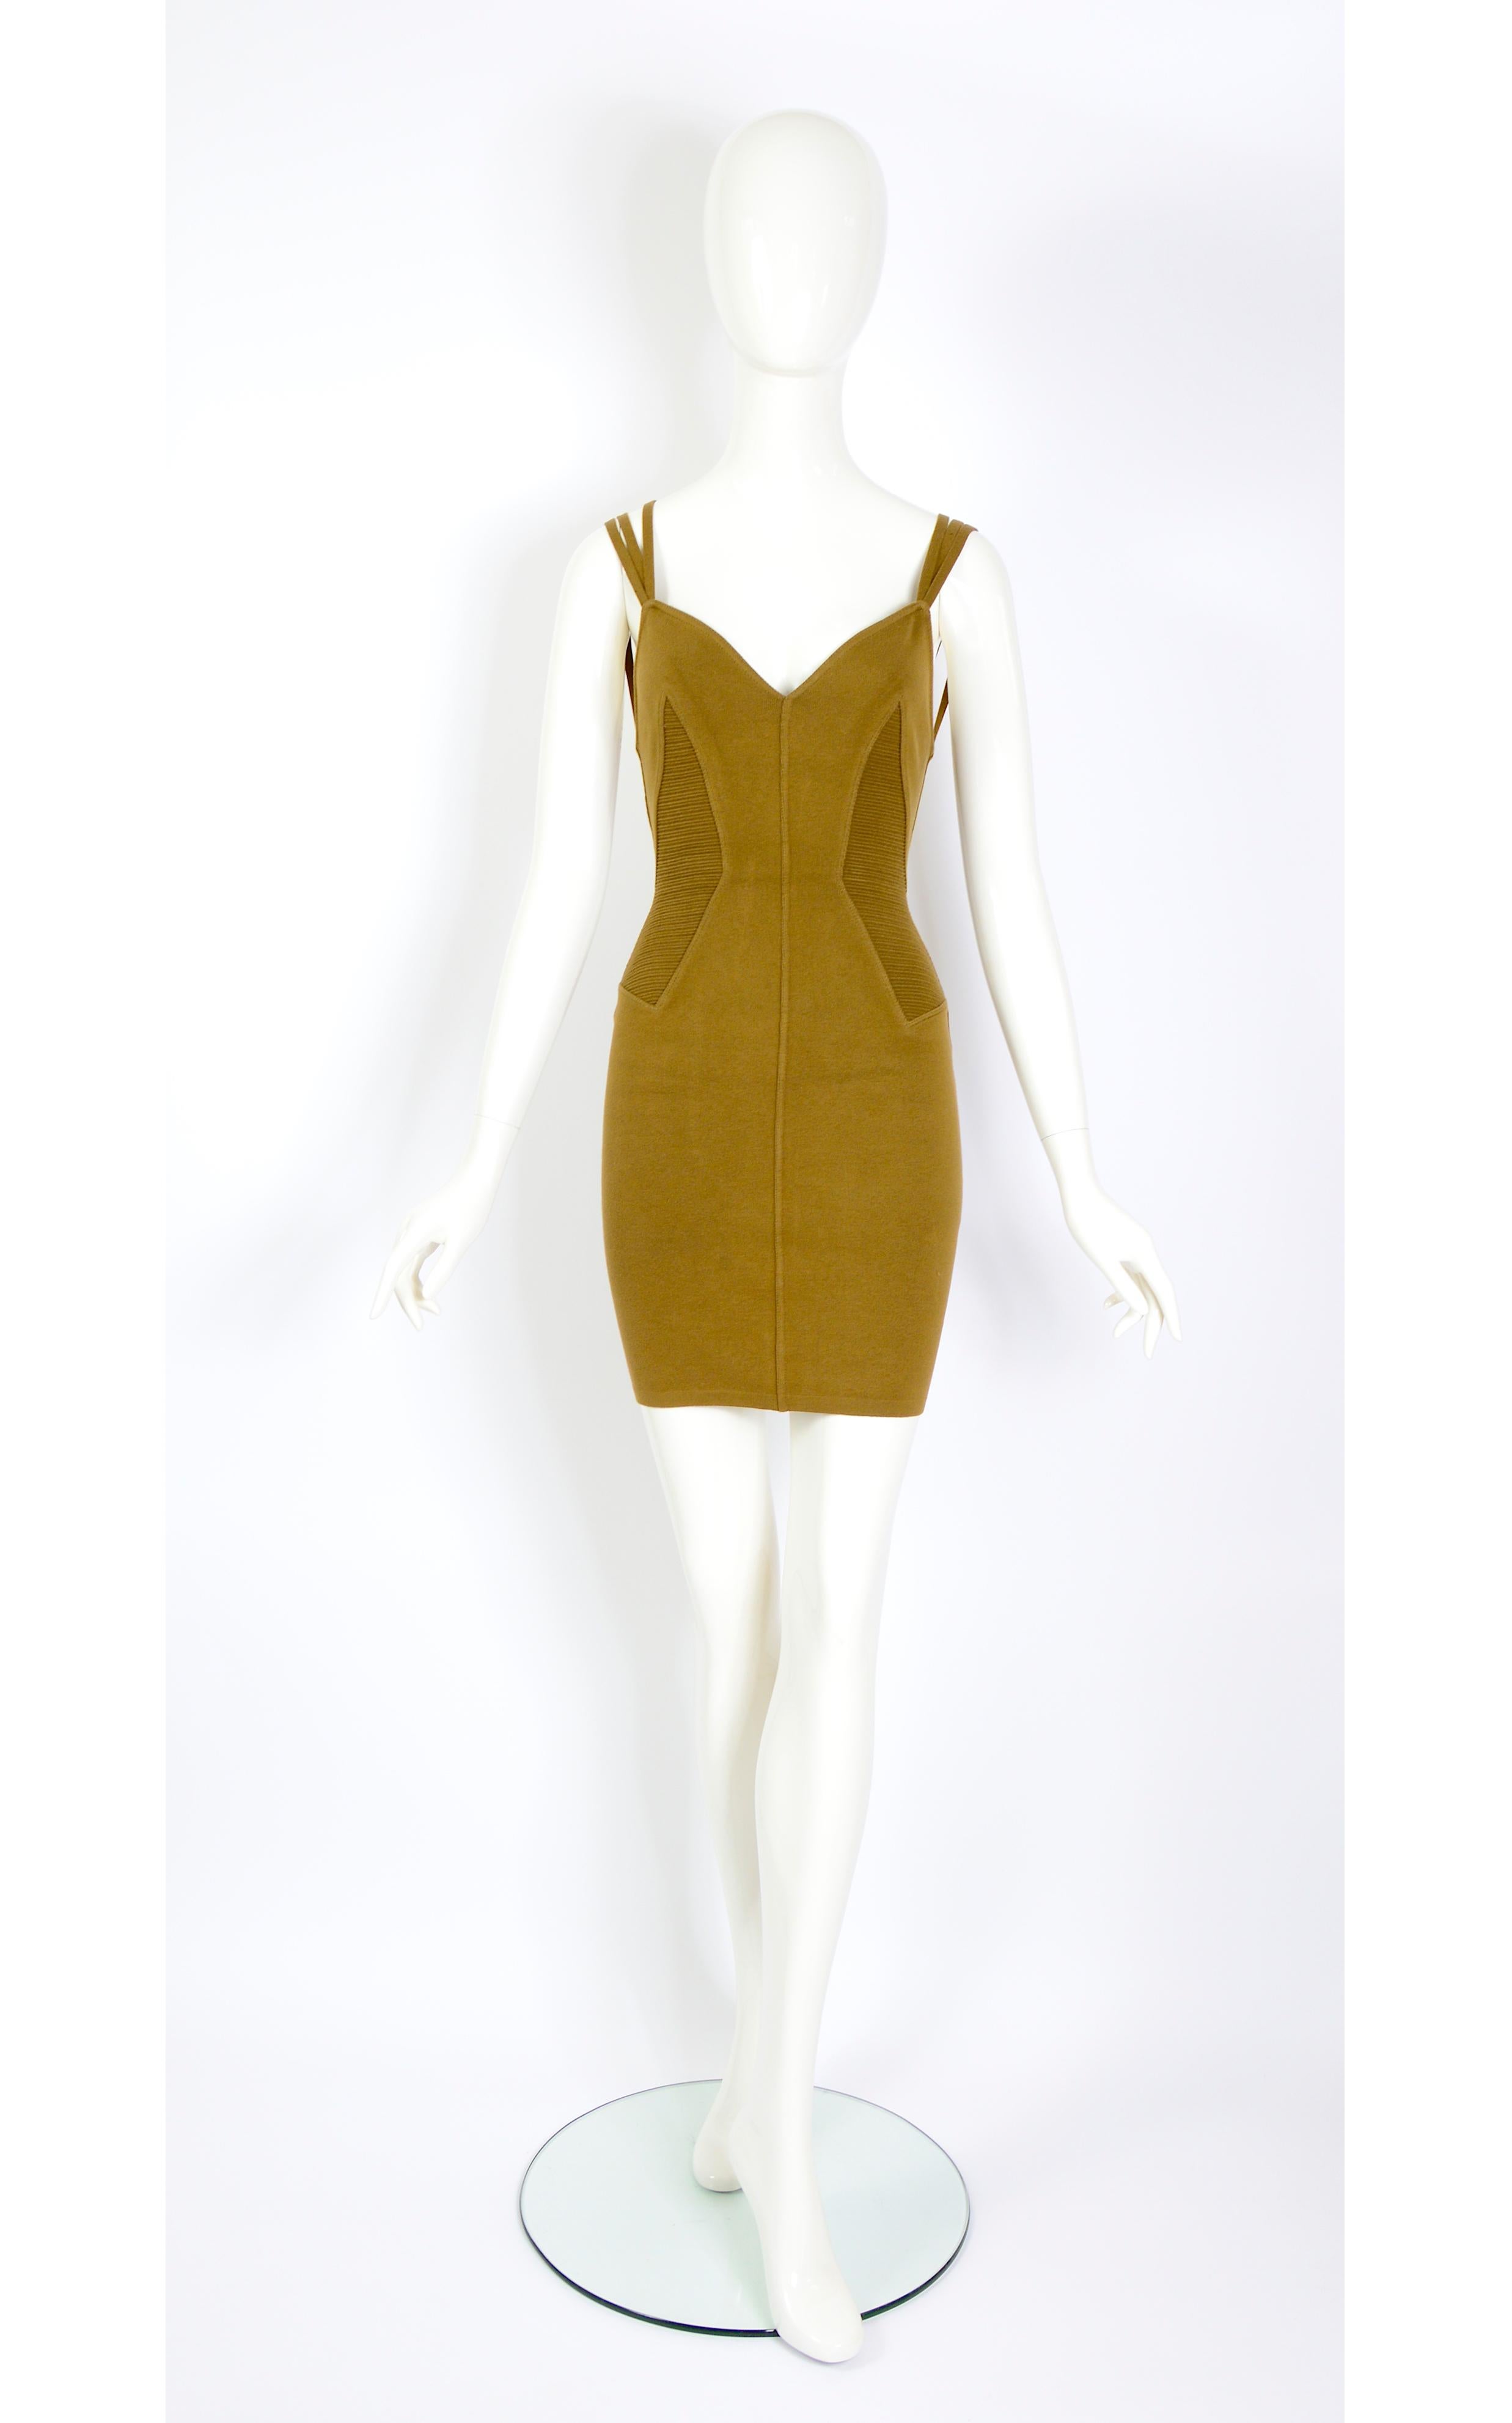 Vintage Alaïa by Azzedine Alaïa spring 1990 runway collection textured bodycon dress.
Ribbed texture at sides with triple strap detailing and  simply slips on 
Made in 85% cotton & 15% elastane material.
Measurements are taken flat without